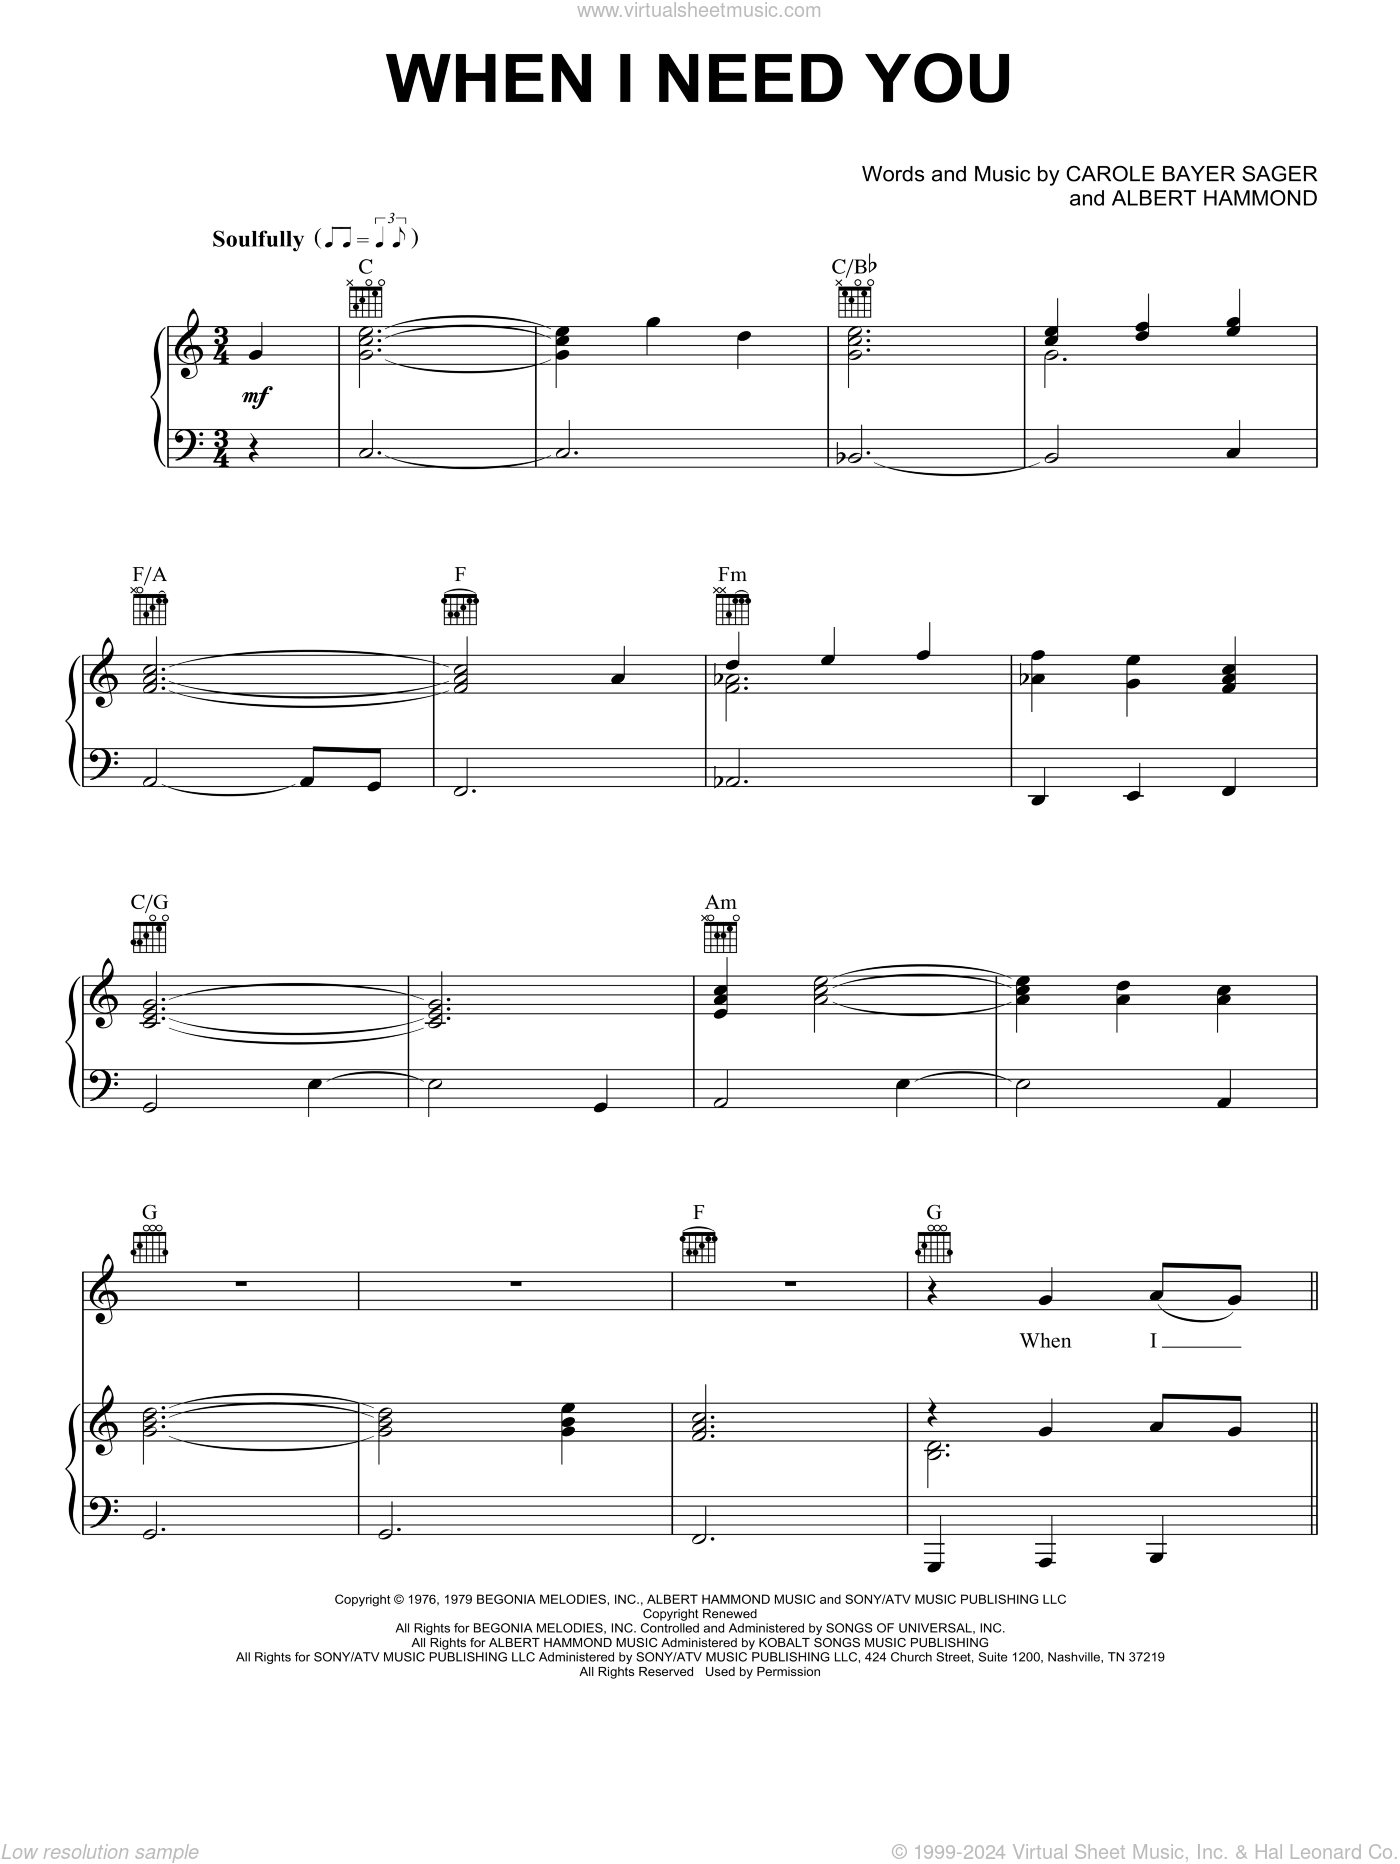 Leo Sayer: When I Need You sheet music for voice, piano or guitar